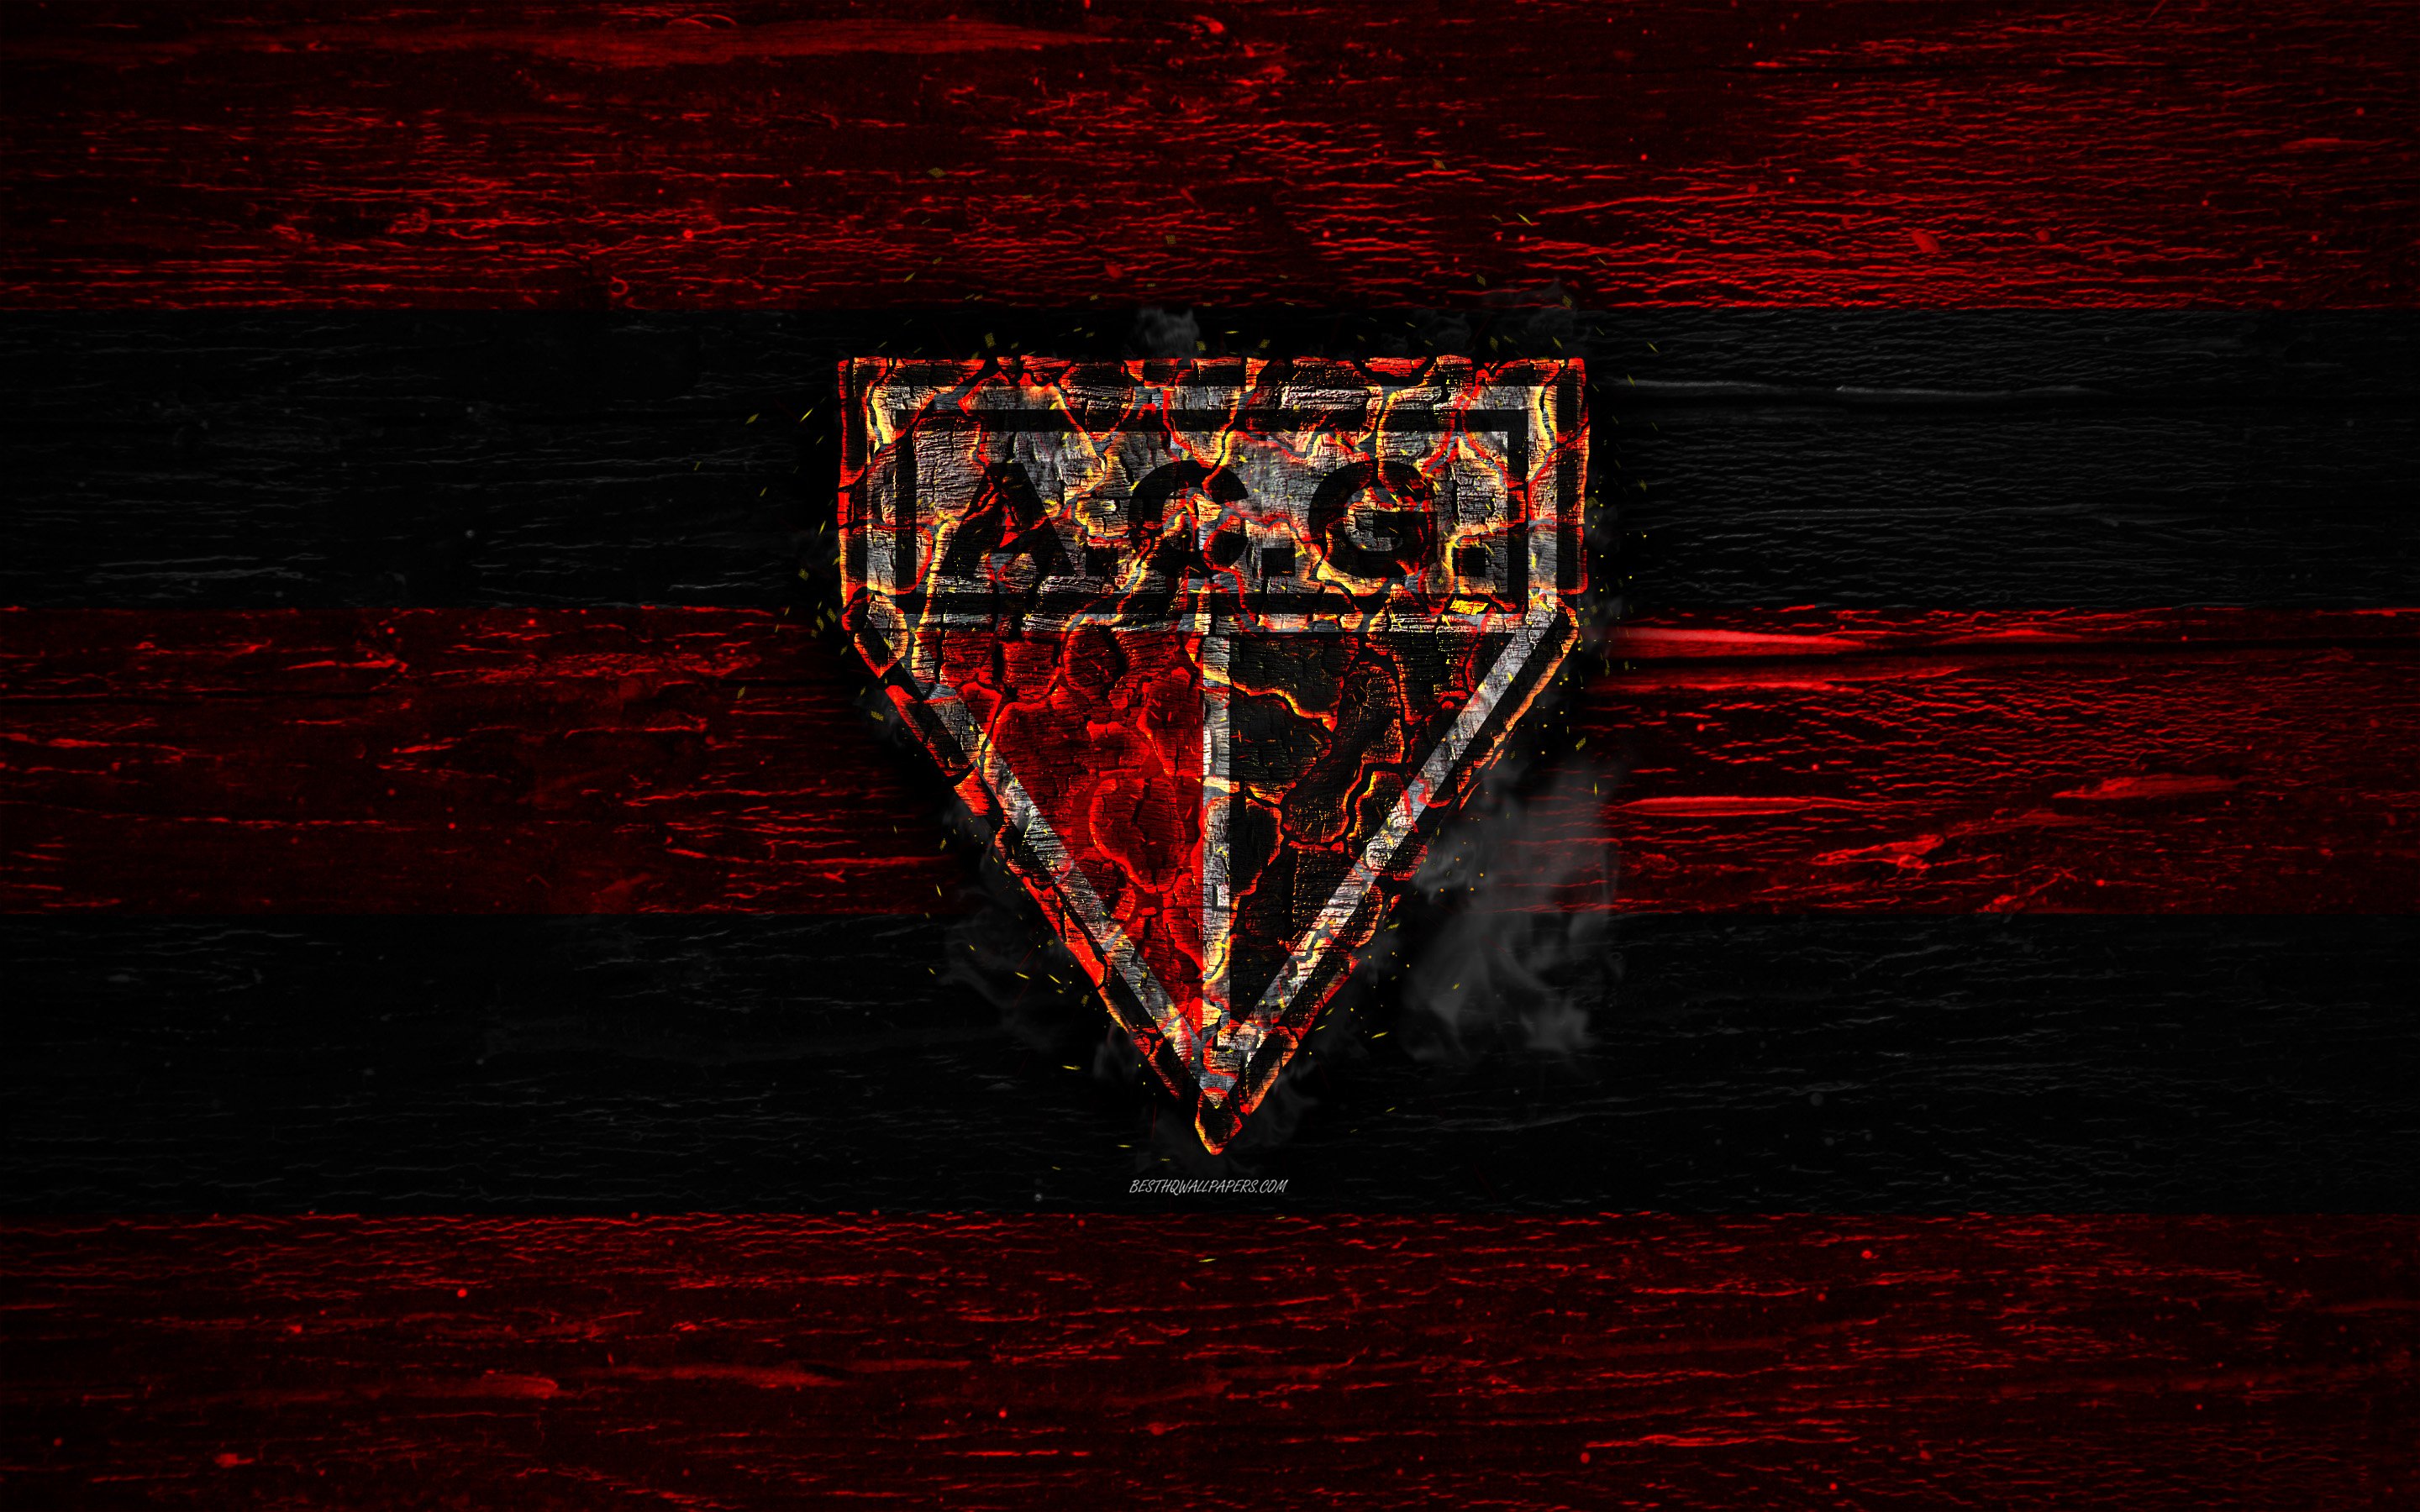 Download wallpapers Atletico Goianiense FC, fire logo, Serie B, red and ...